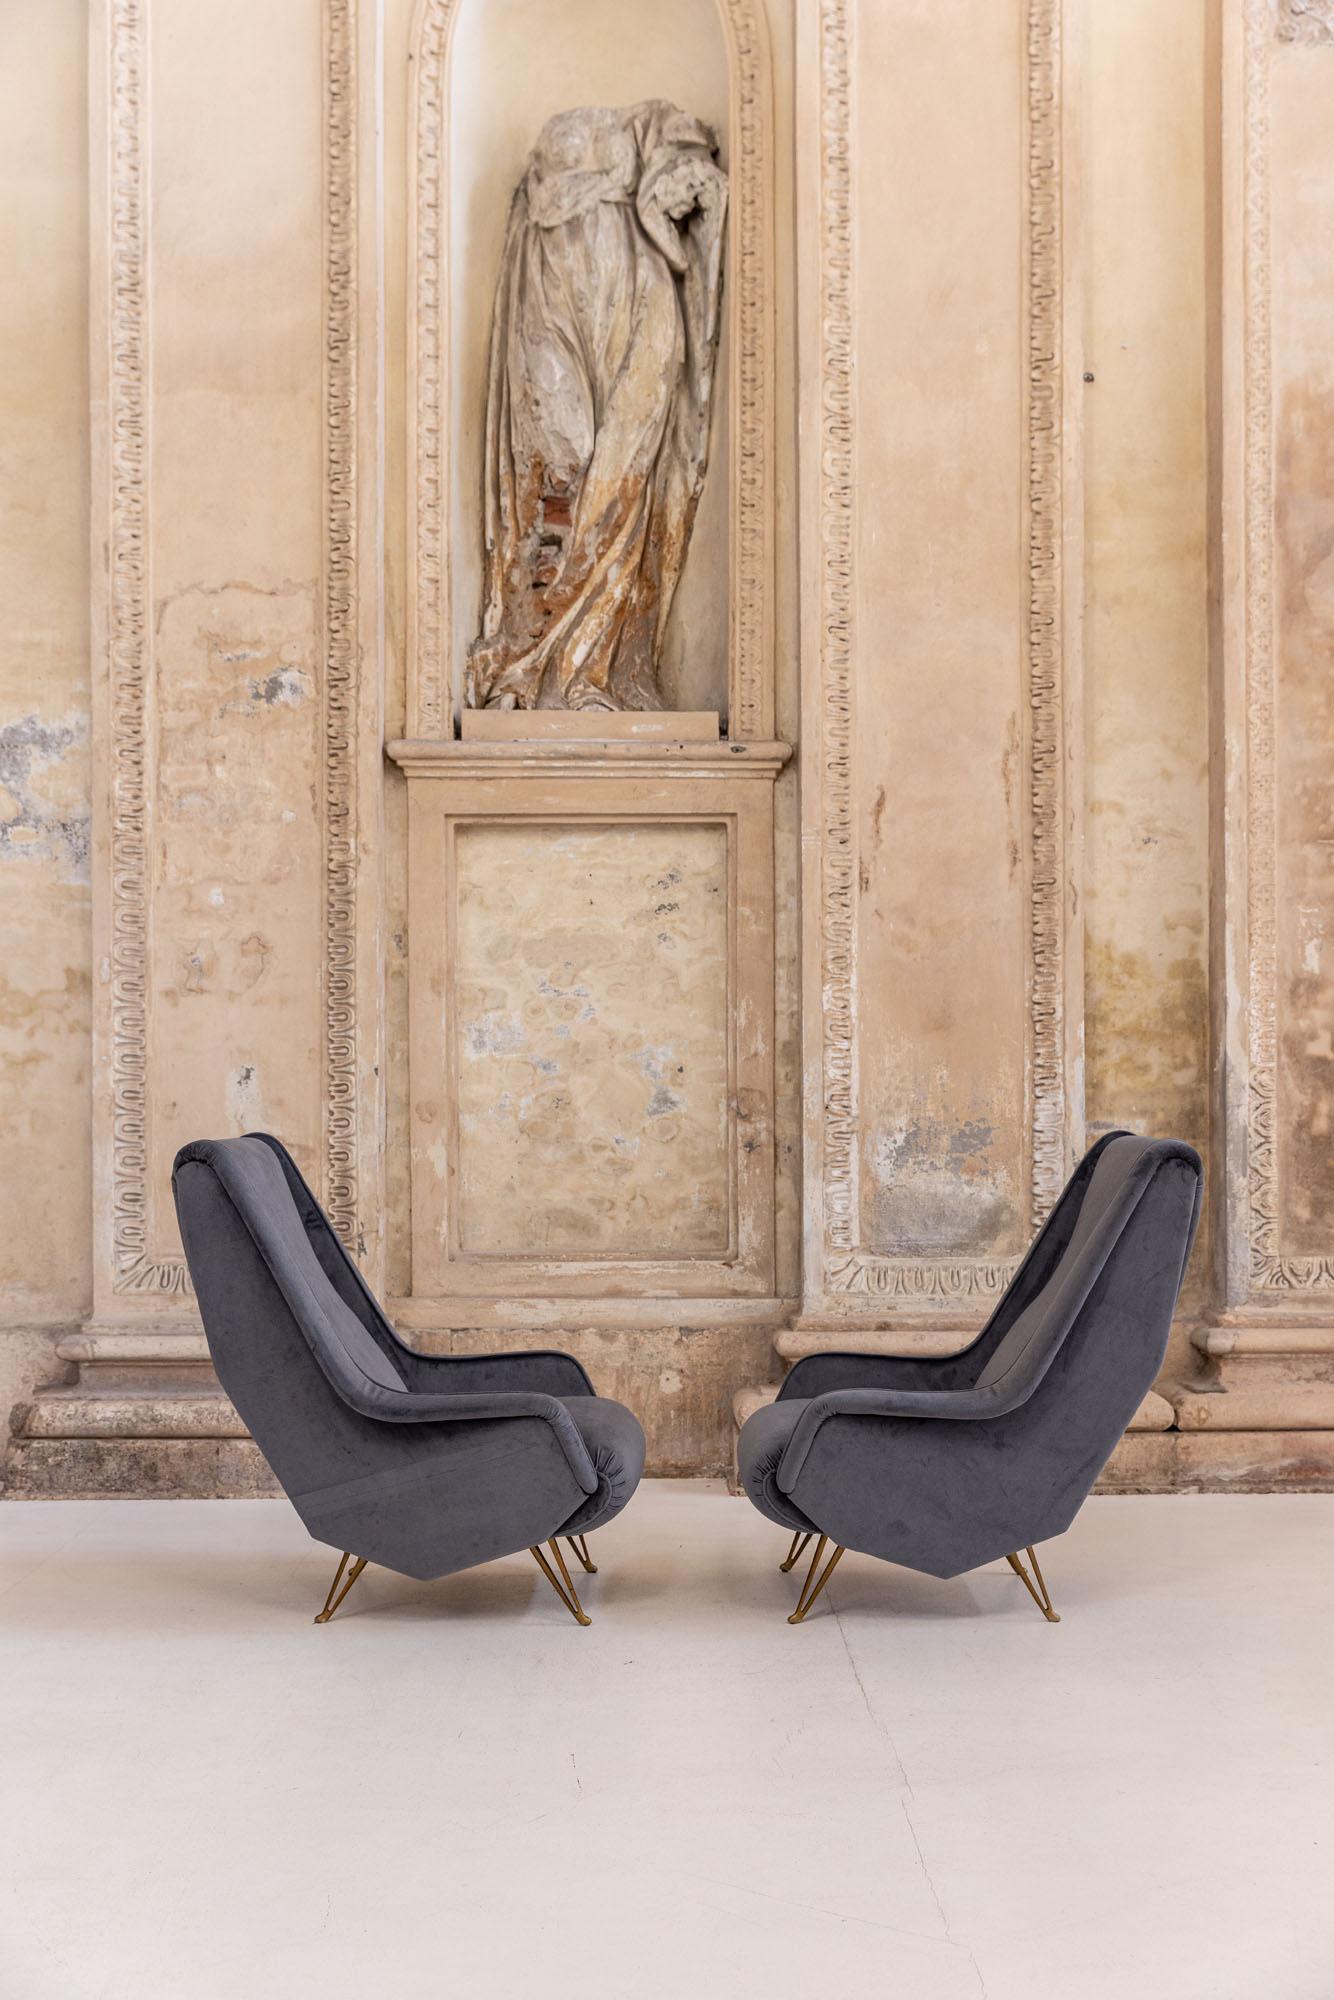 Stunning pair of ISA Bergamo armchairs, Italy 1950s.
Original shaped feet attributed to Gio Ponti.
The model is particularly comfortable thanks to the high back and the design. 
Newly reupholstered with blue velvet.